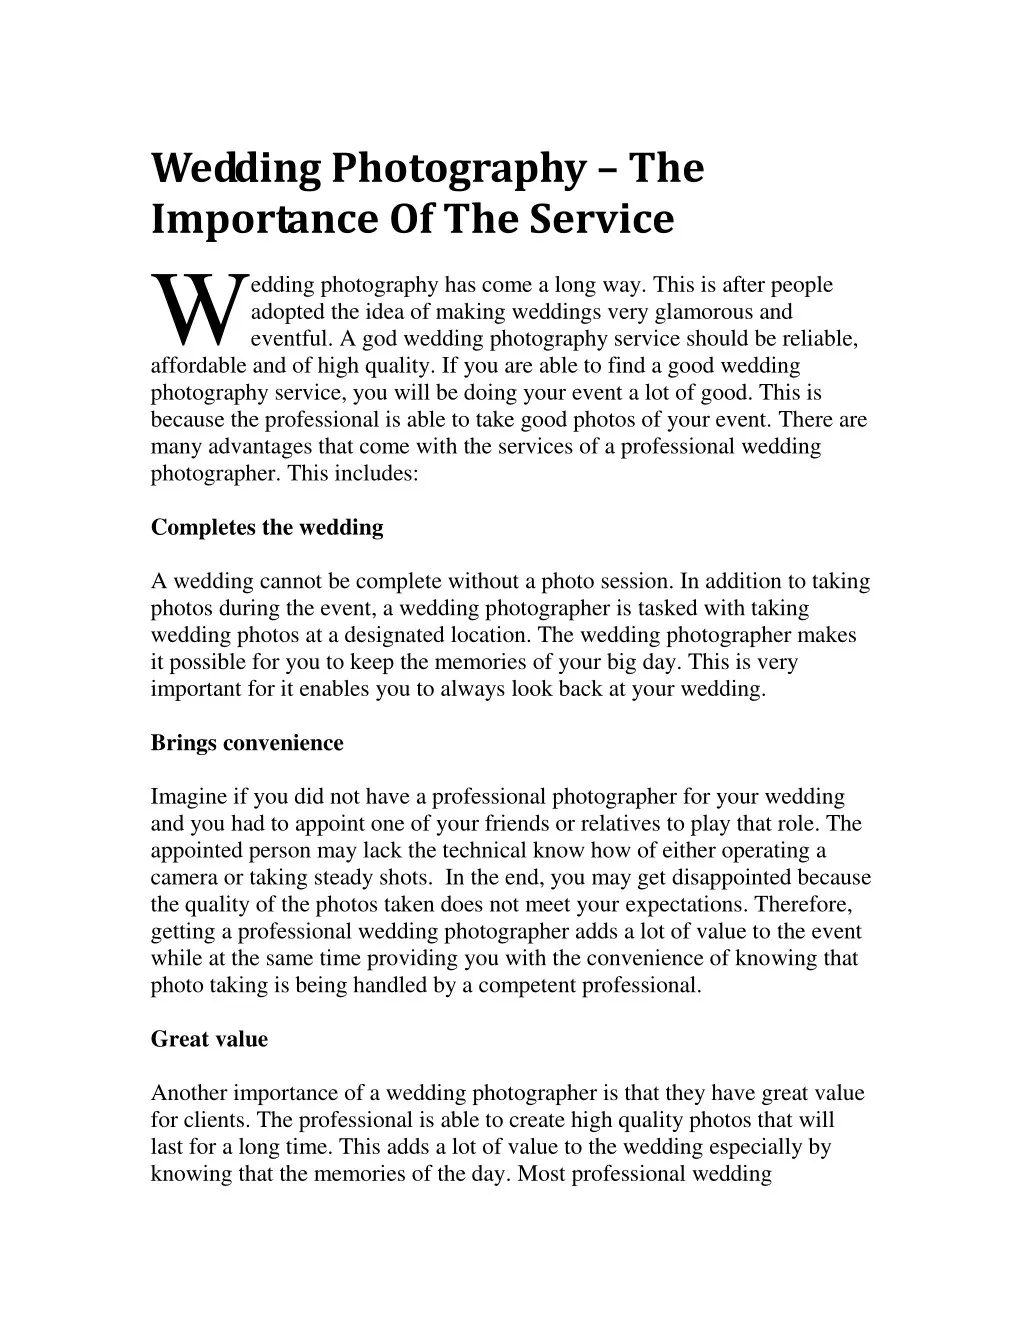 wedding photography the importance of the service